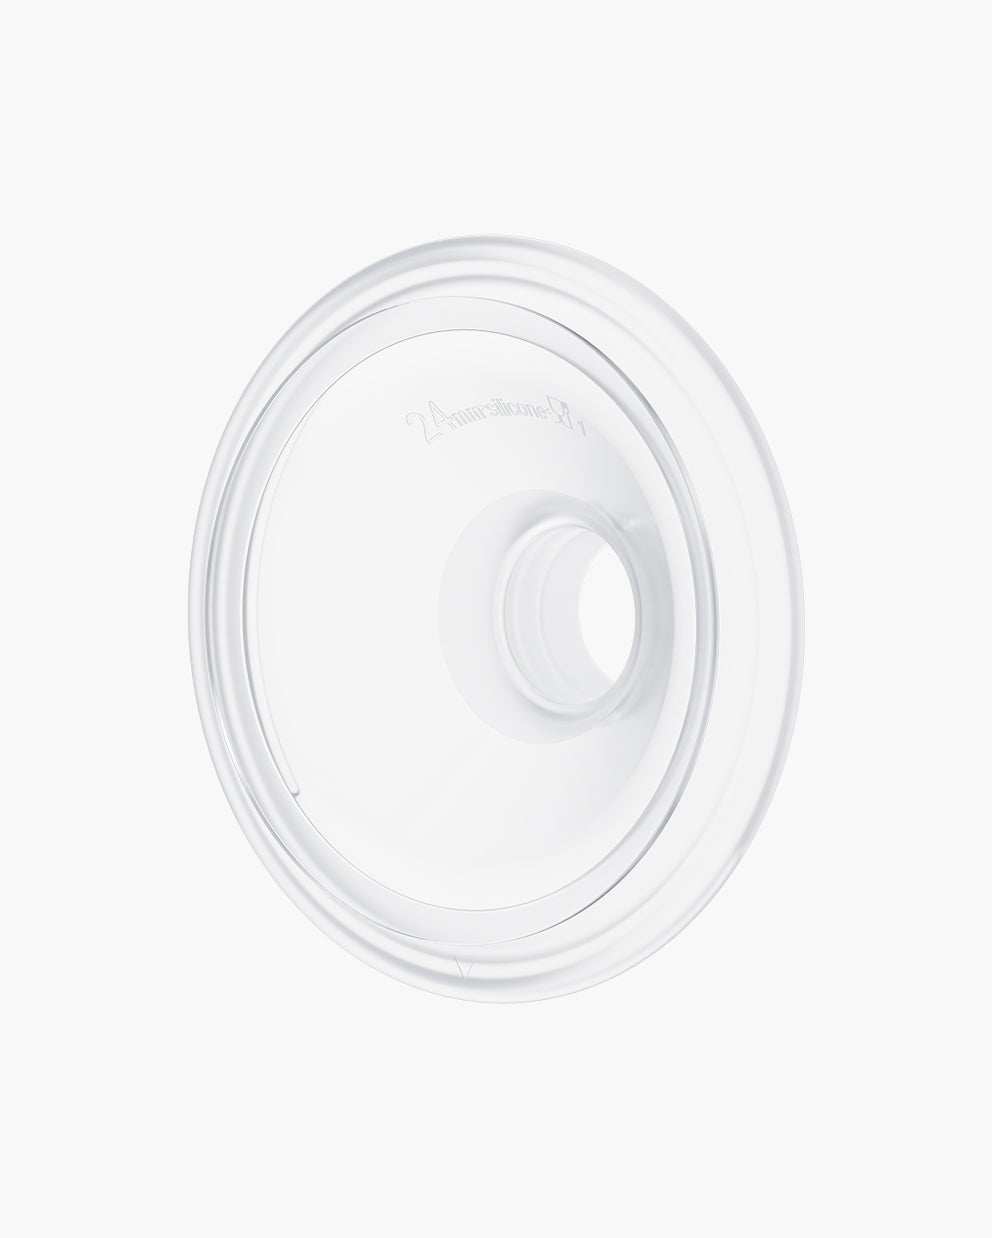 S12 Pro Breast Pump Replacement Parts